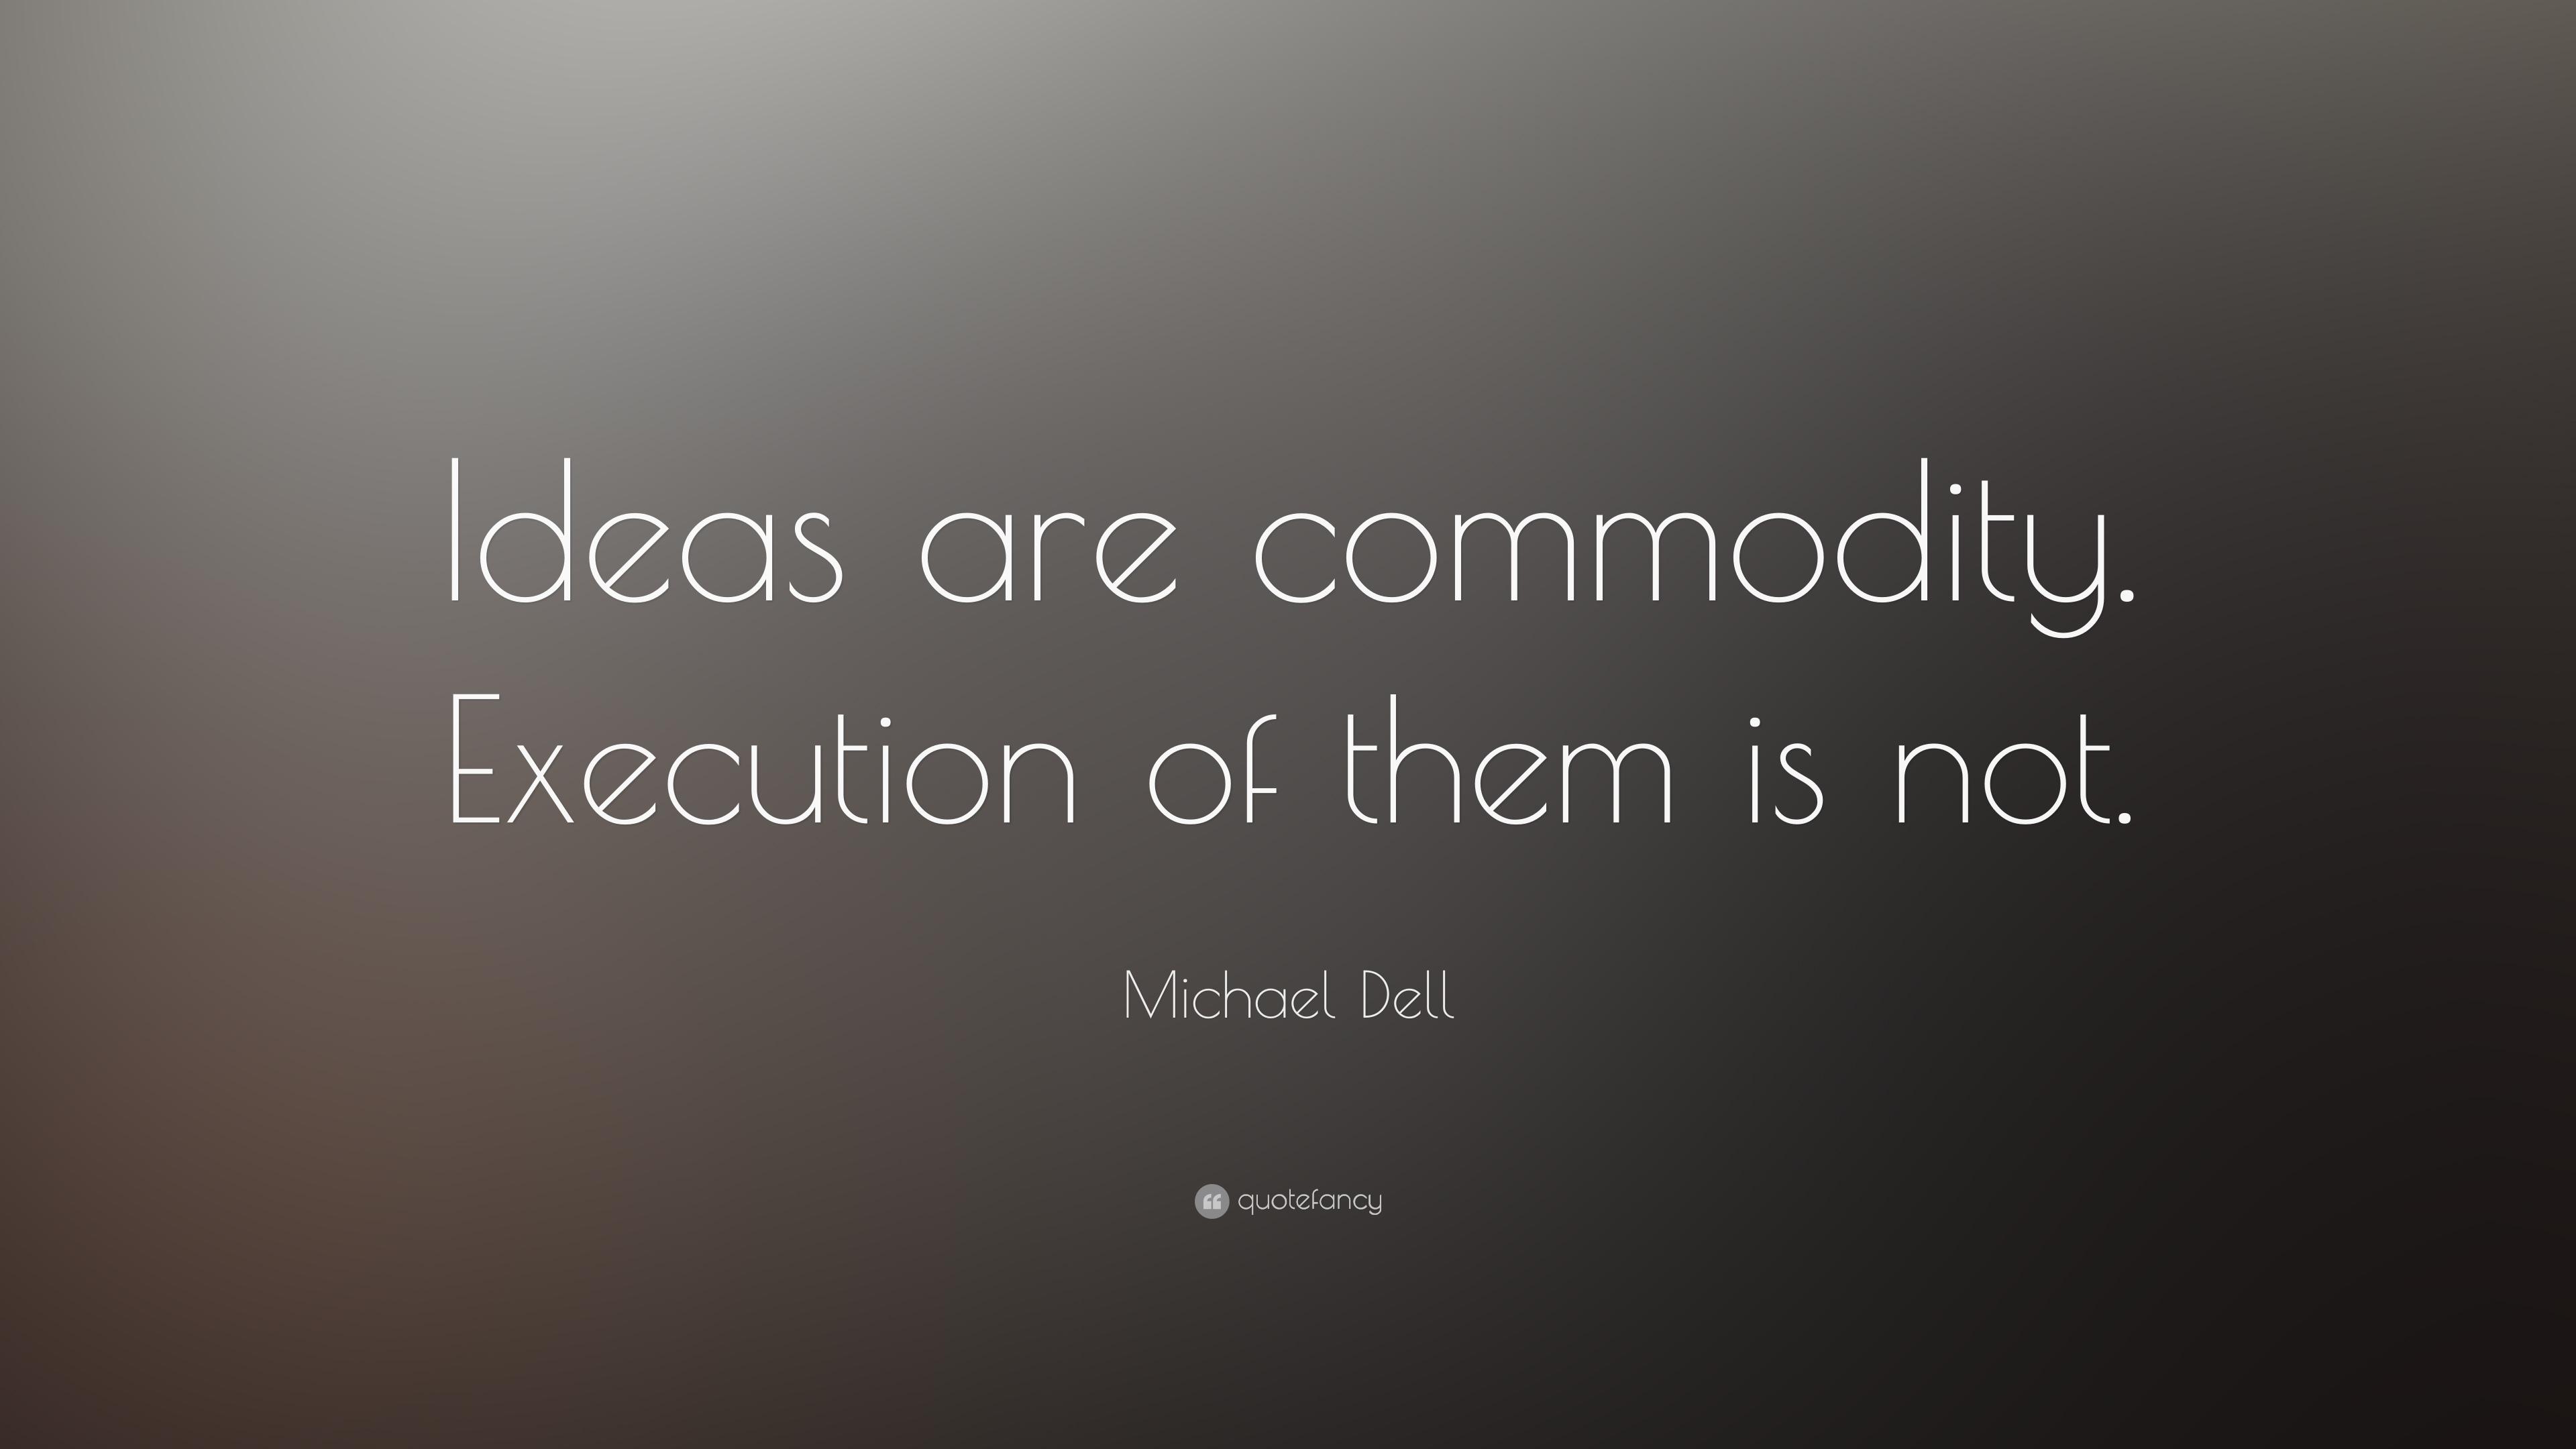 Michael Dell Quote: “Ideas are commodity. Execution of them is not.” (16 wallpaper)